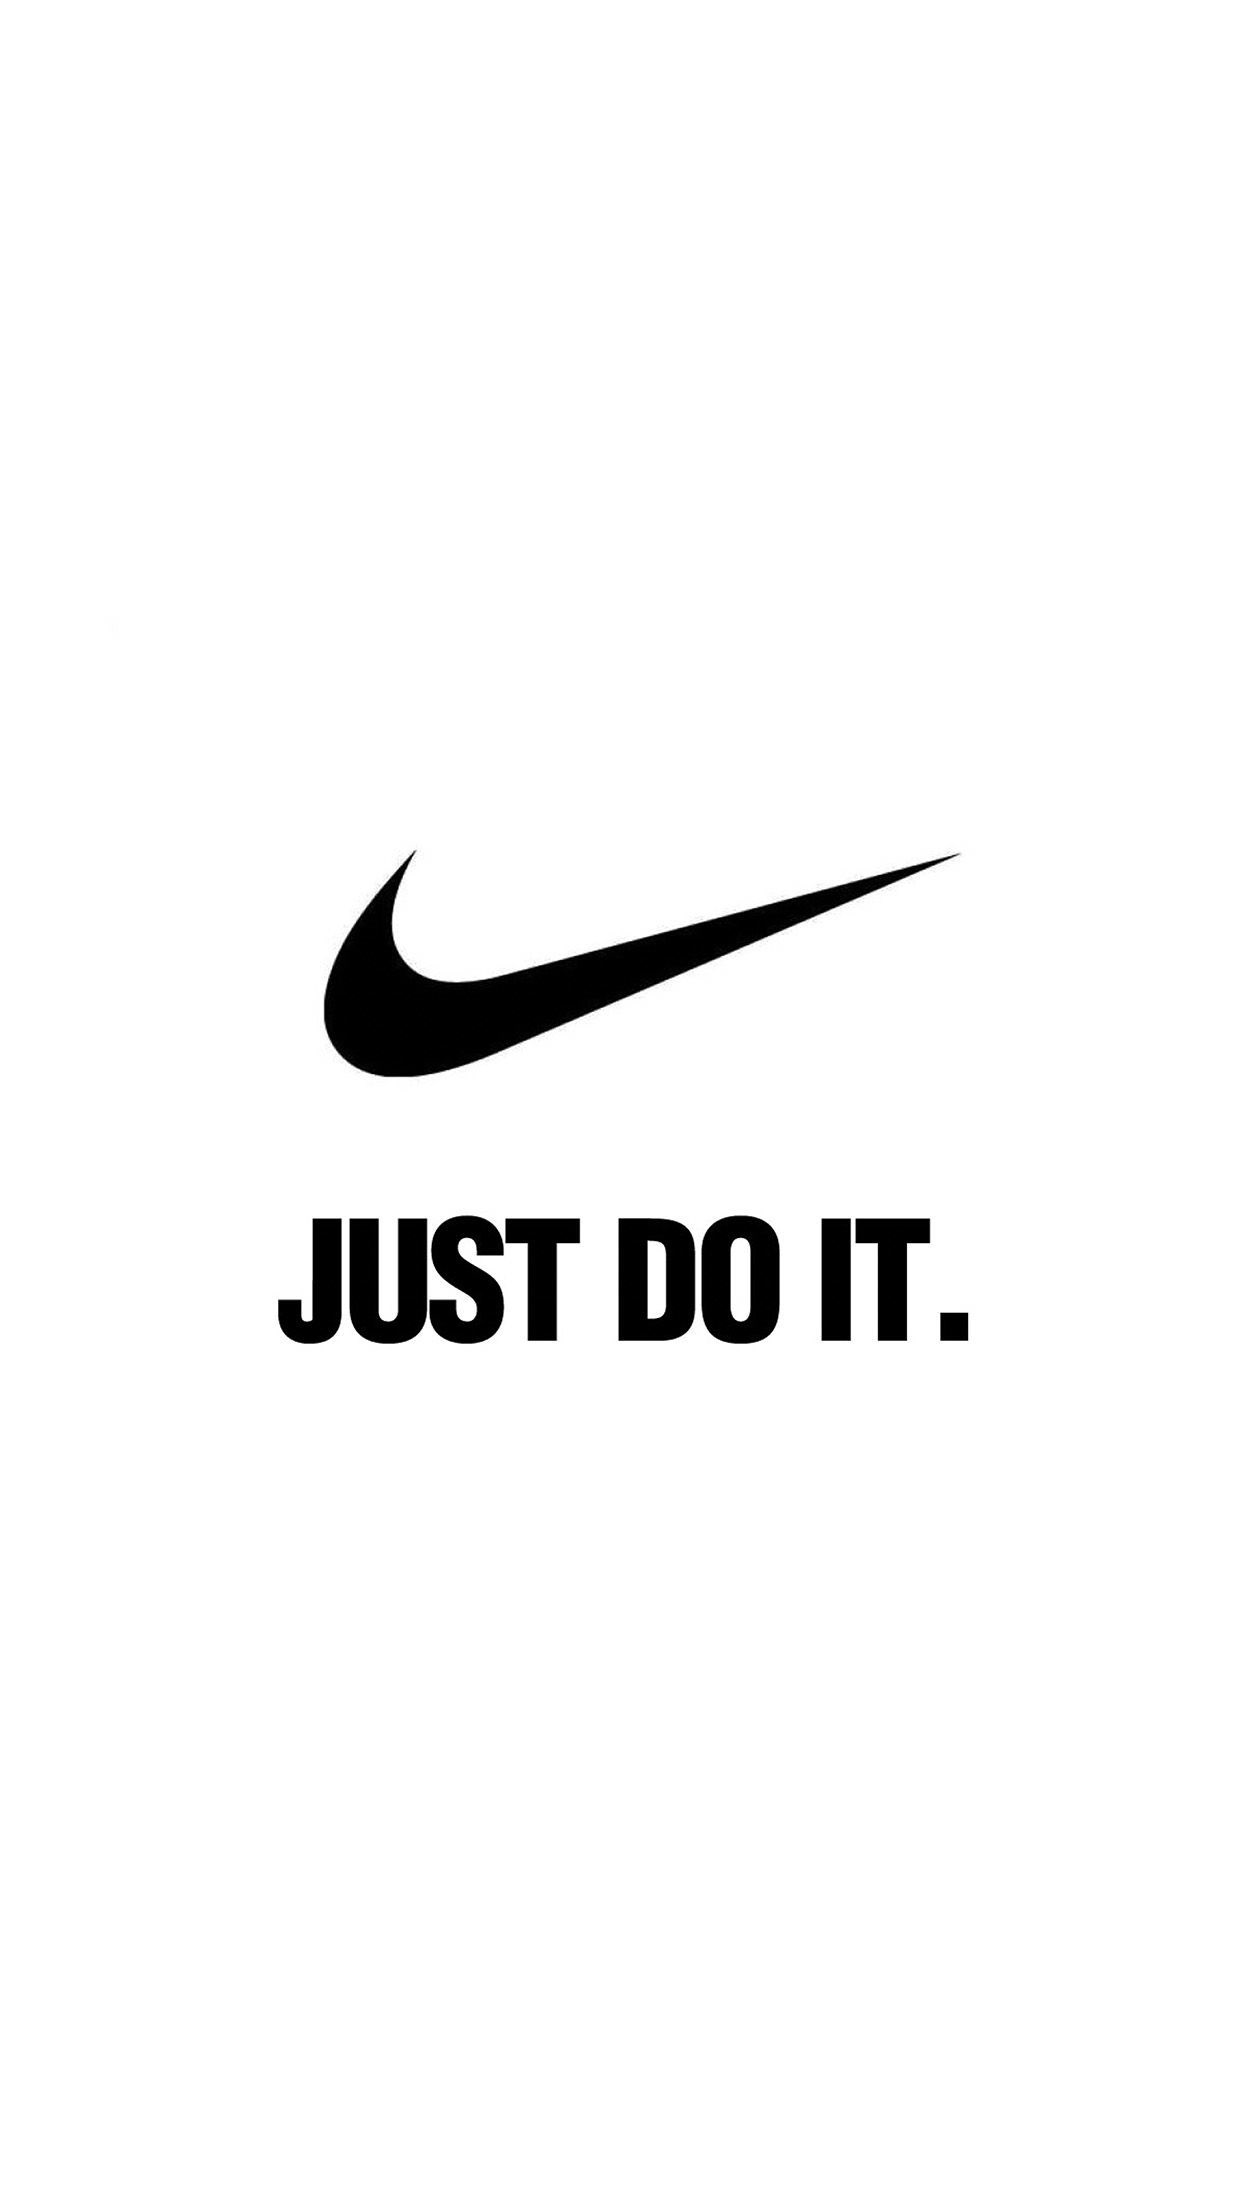 Just do it wallpaper (2) – Printable graphics